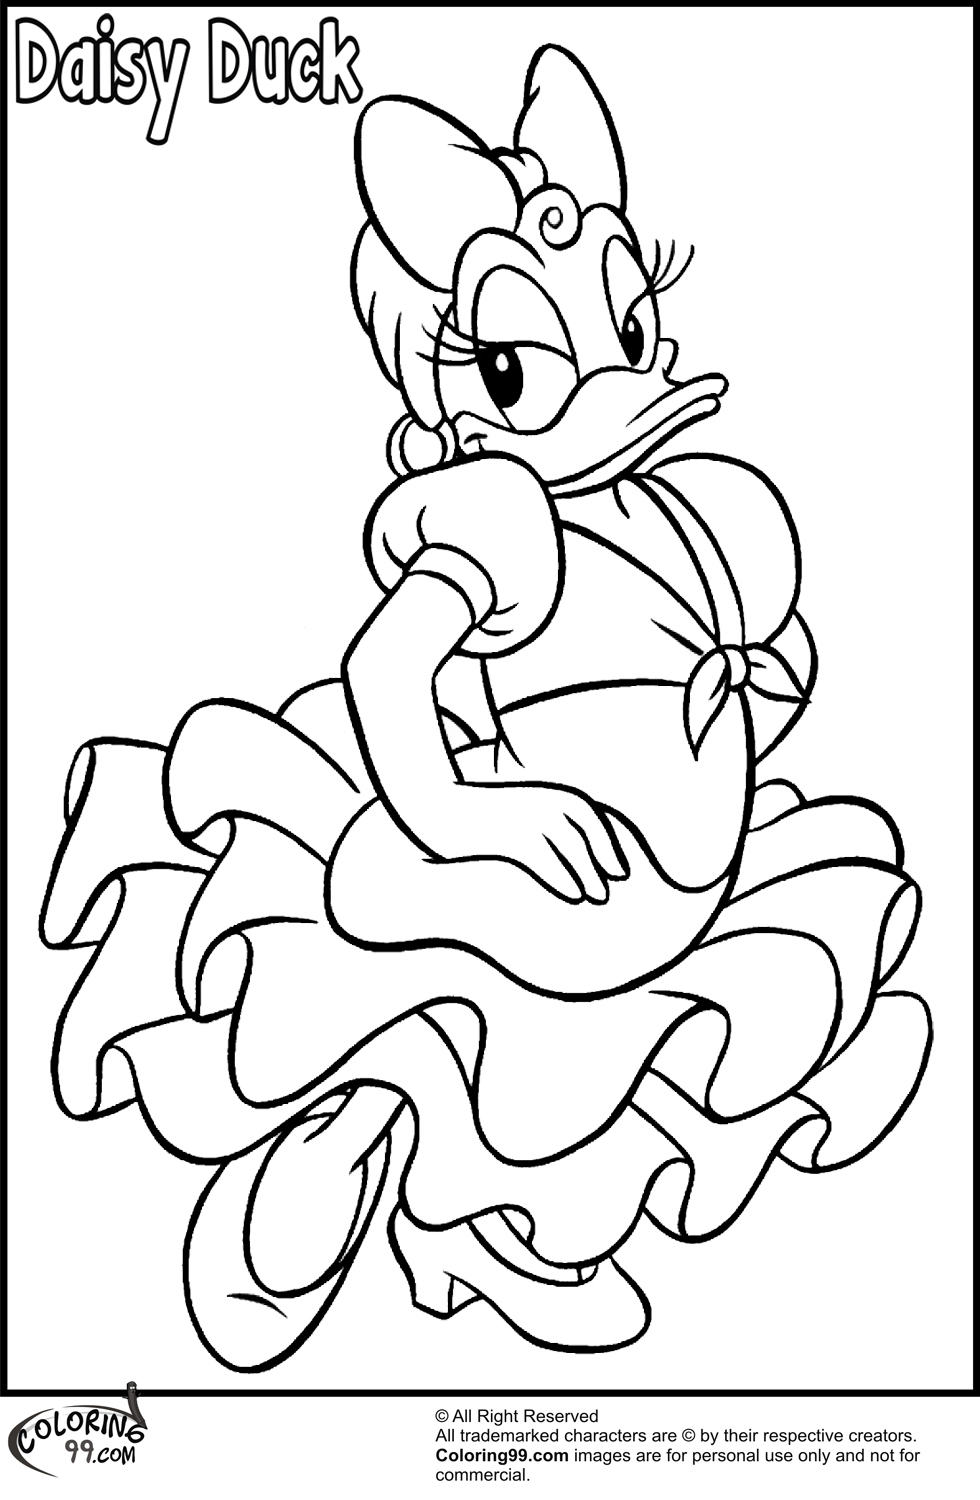 Download Daisy Duck Coloring Pages | Team colors